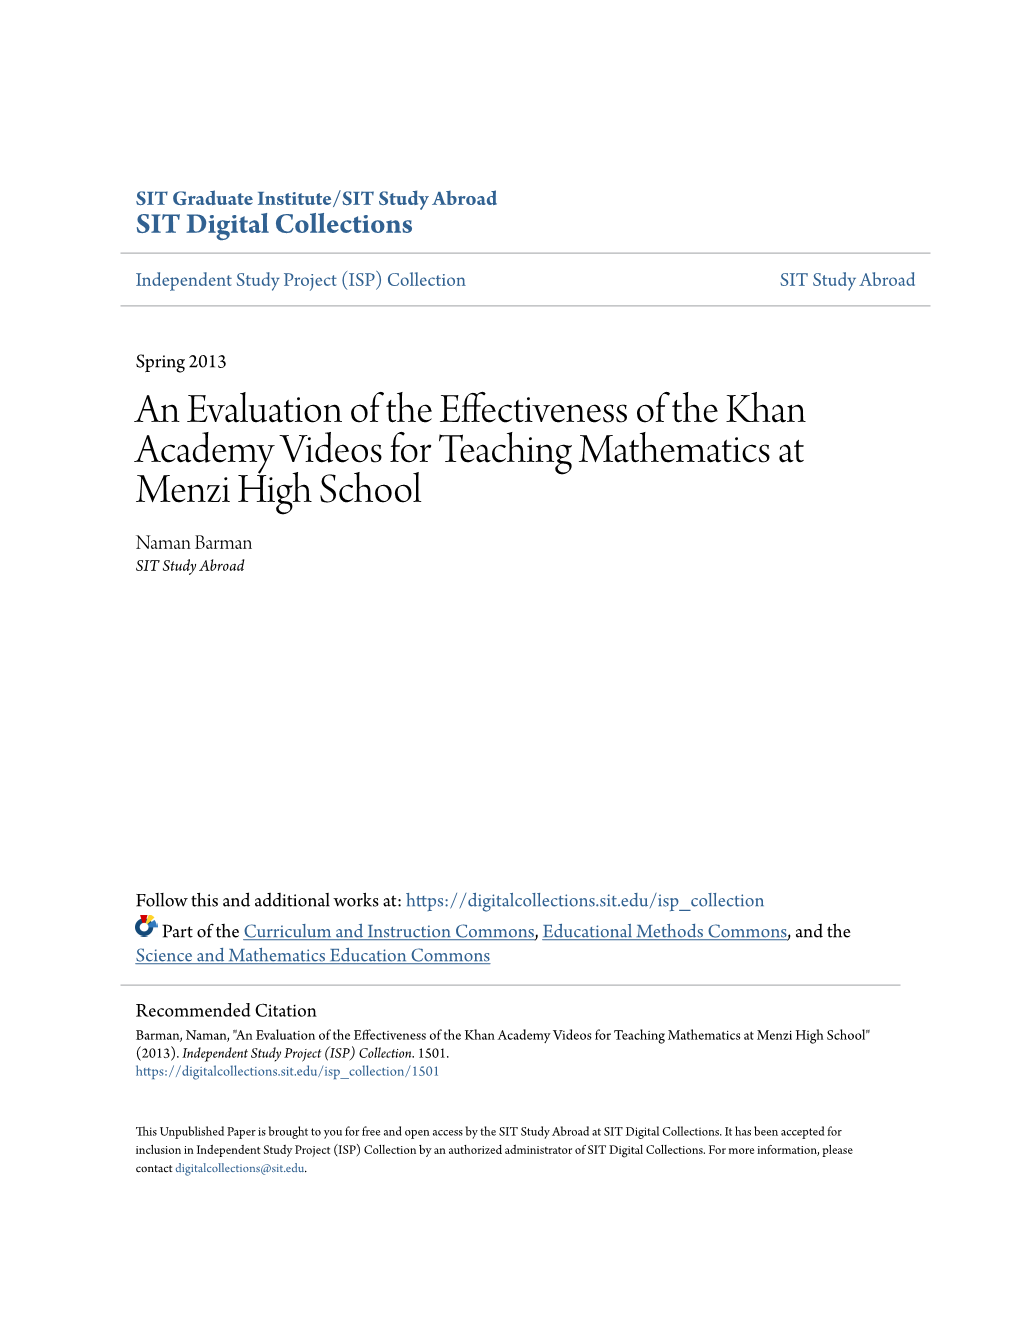 An Evaluation of the Effectiveness of the Khan Academy Videos for Teaching Mathematics at Menzi High School Naman Barman SIT Study Abroad